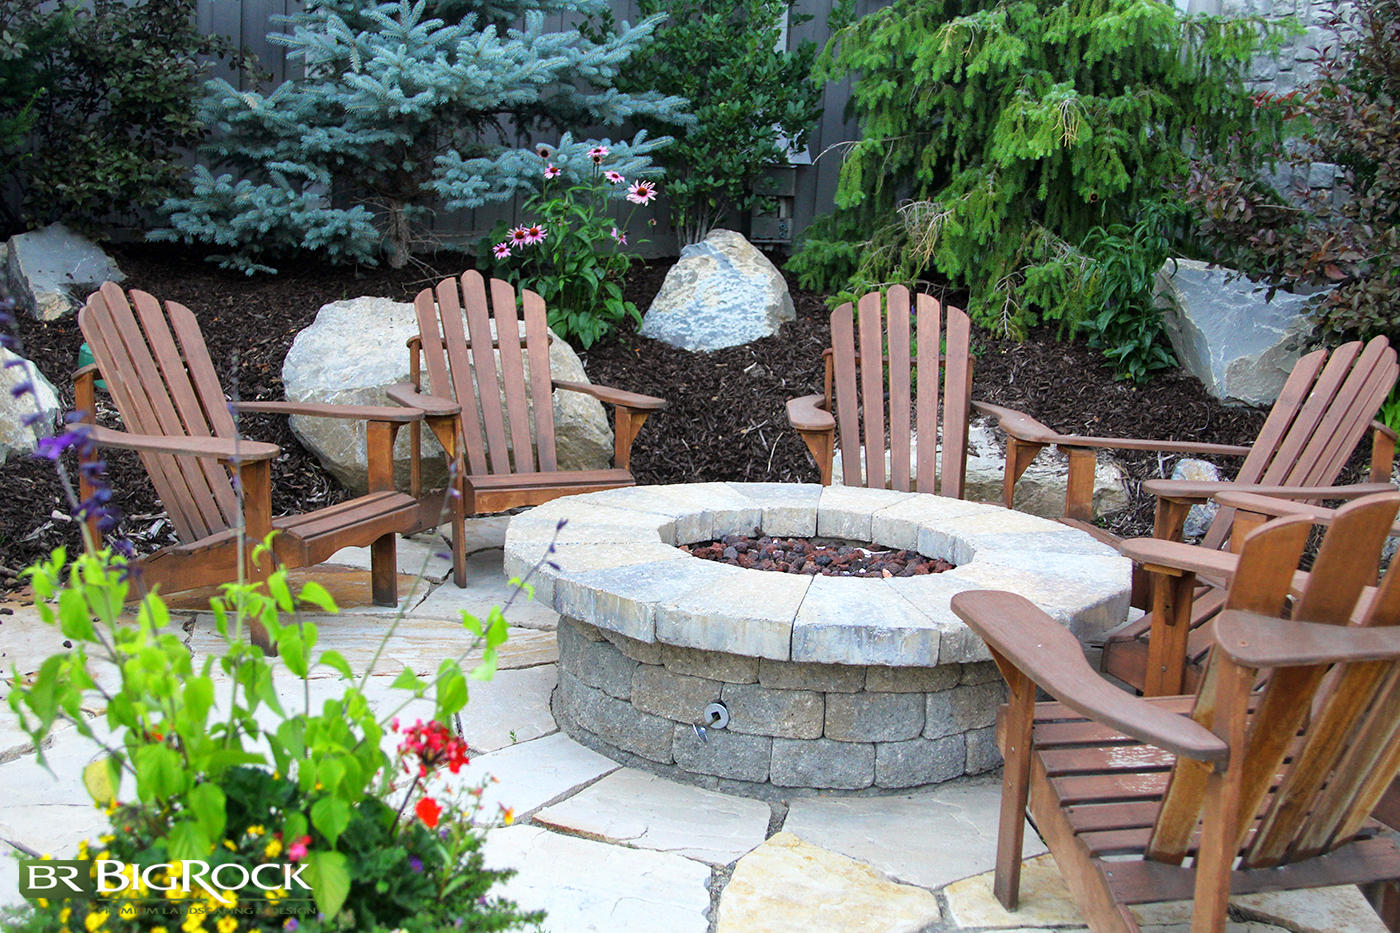 A raised gas fire pit is the perfect outdoor living feature for your residential backyard landscaping. Built with pavers or customized to match your landscape design, Big Rock Landscaping can create any fire pit installation.